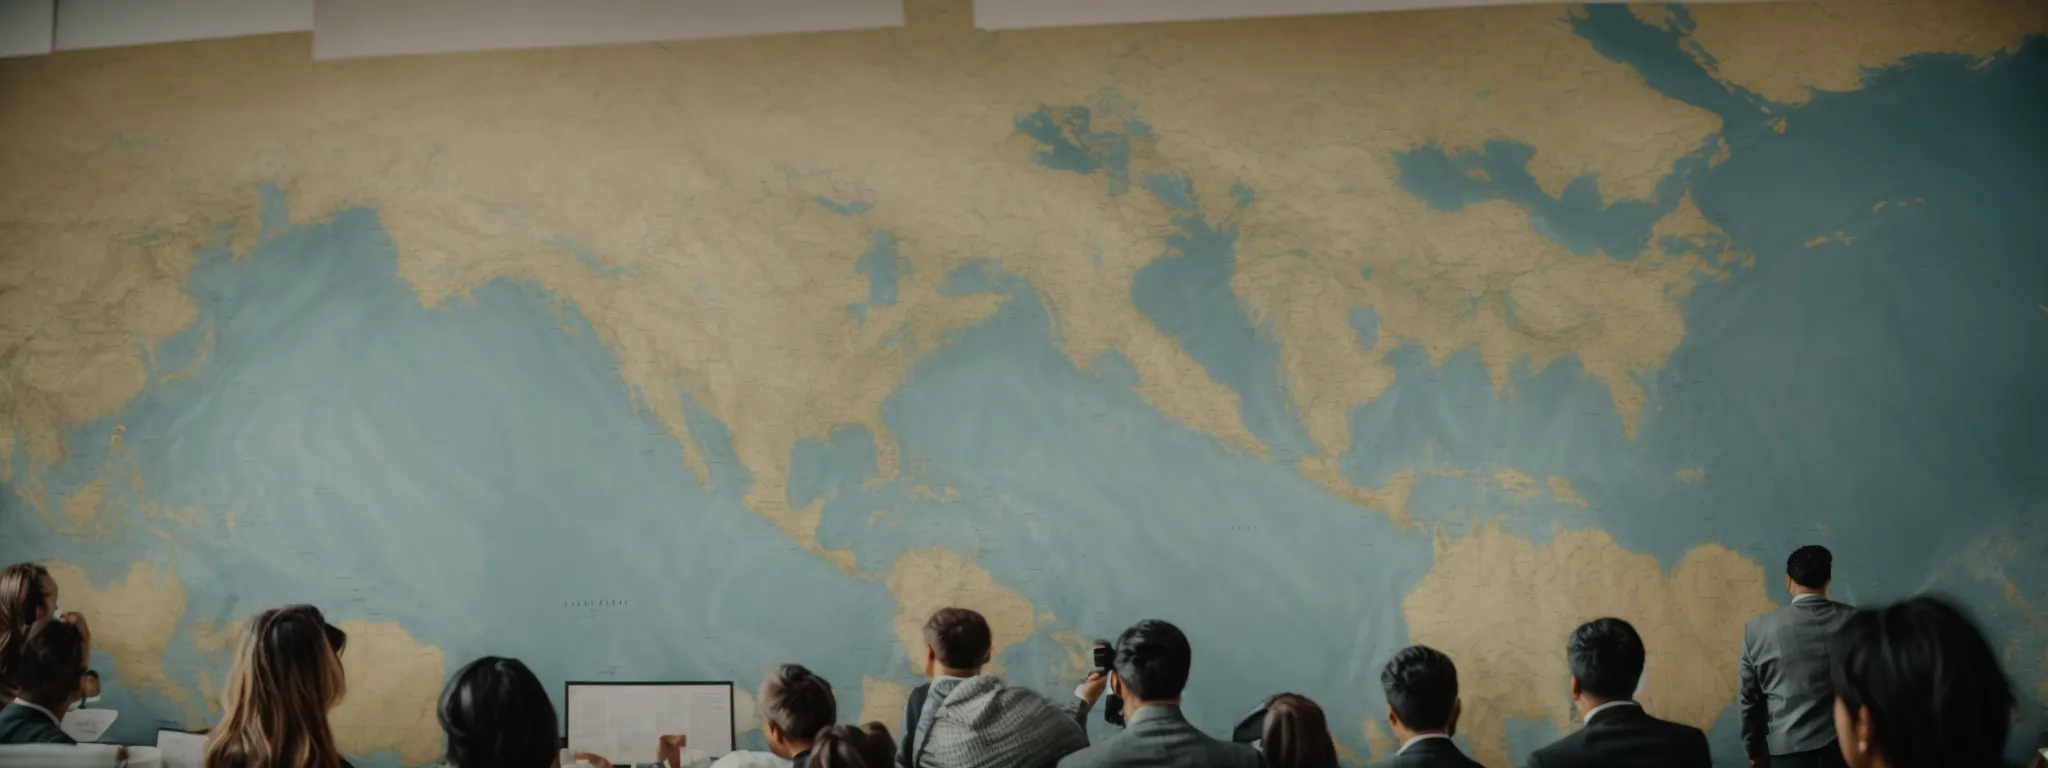 a team views a large world map on a wall, discussing strategies for global digital expansion.